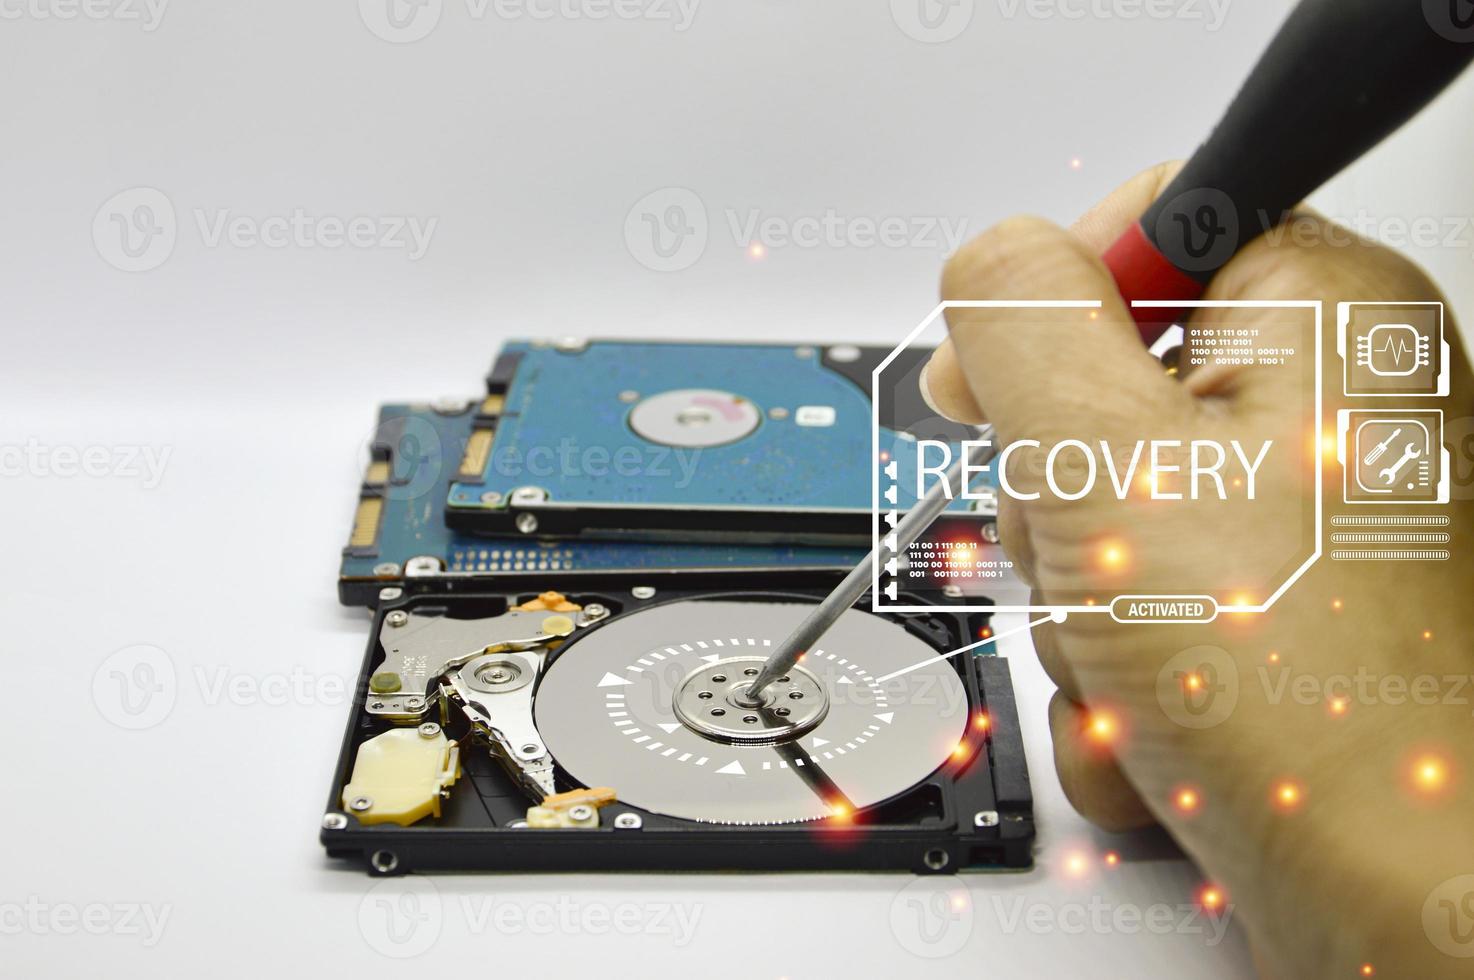 Hard drive is an important storage device, concept of data protection with security. photo